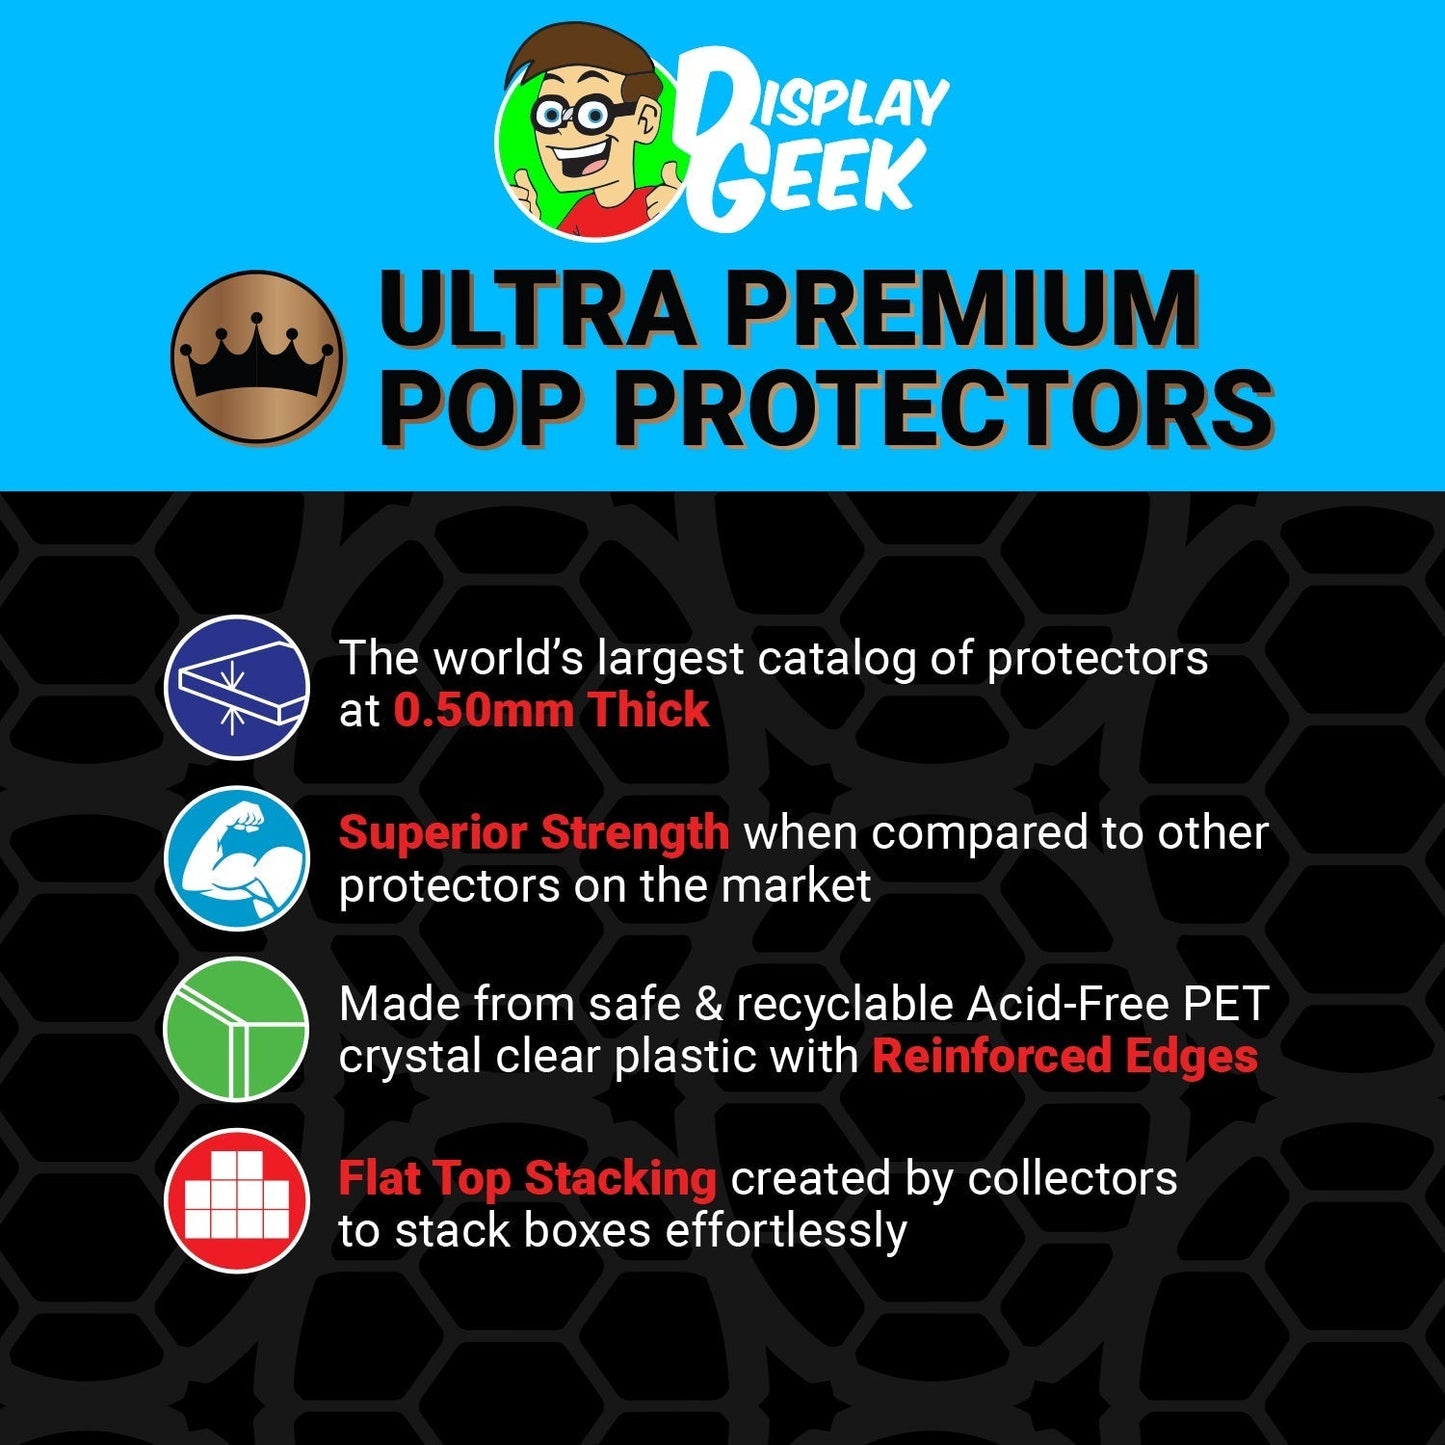 Pop Protector for Aang Funko Pop Pez - PPG Pop Protector Guide Search Created by Display Geek